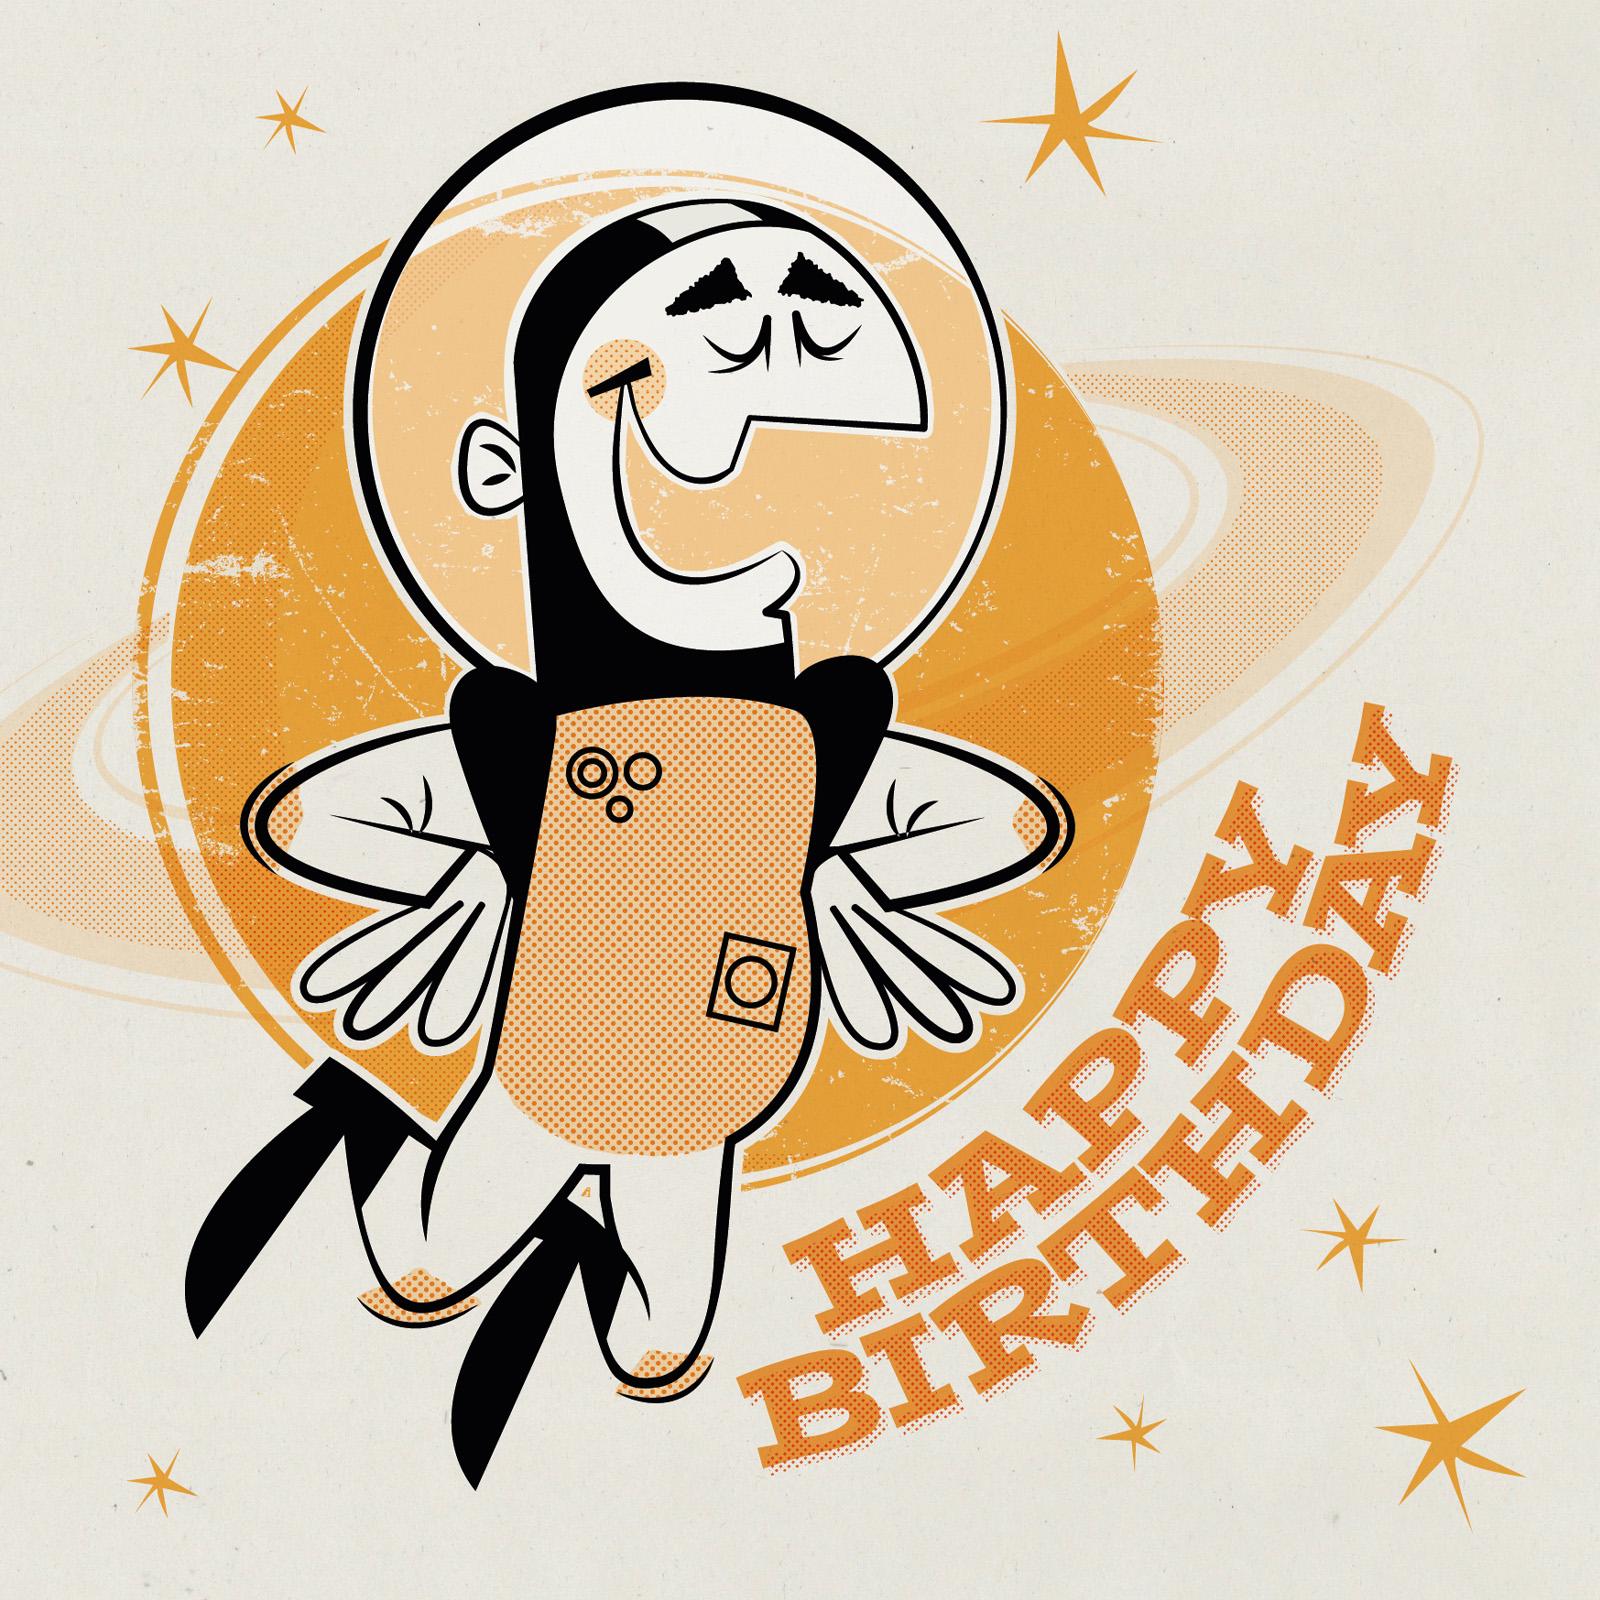 1950s cartoon style spaceman in front of a planet in an orange and black palette with the words happy birthday in a retro 50s-style font